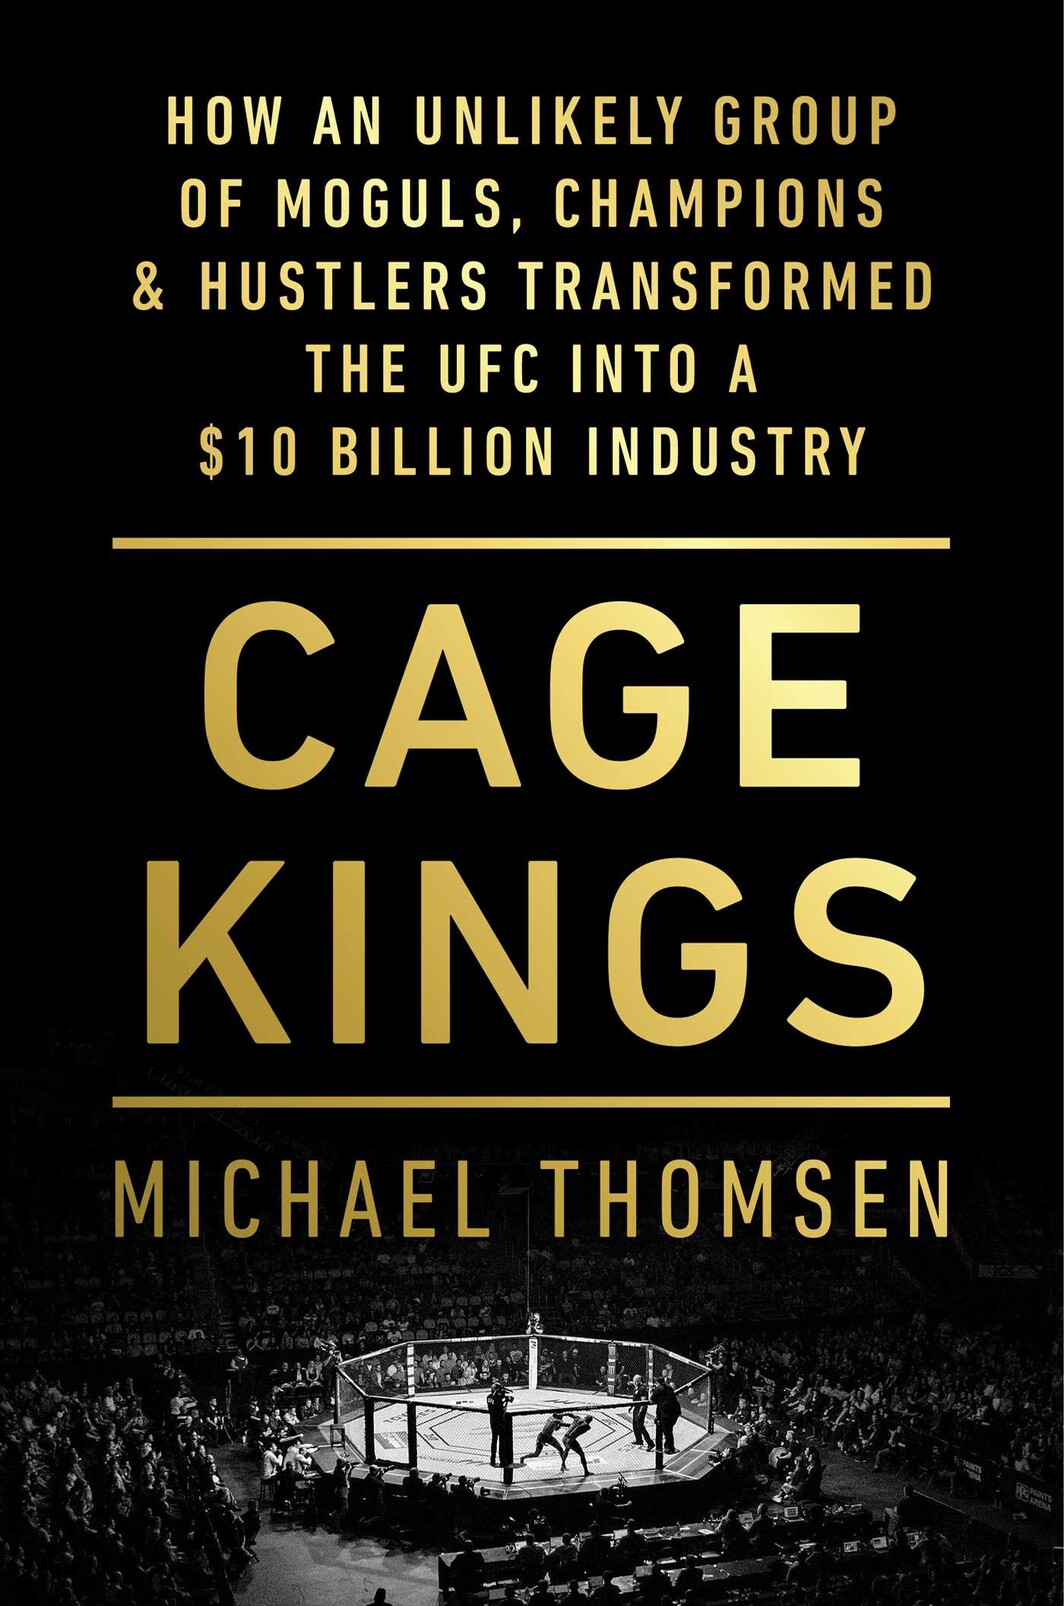 The cover of Cage Kings: How an Unlikely Group of Moguls, Champions & Hustlers Transformed the UFC into a $10 Billion Industry